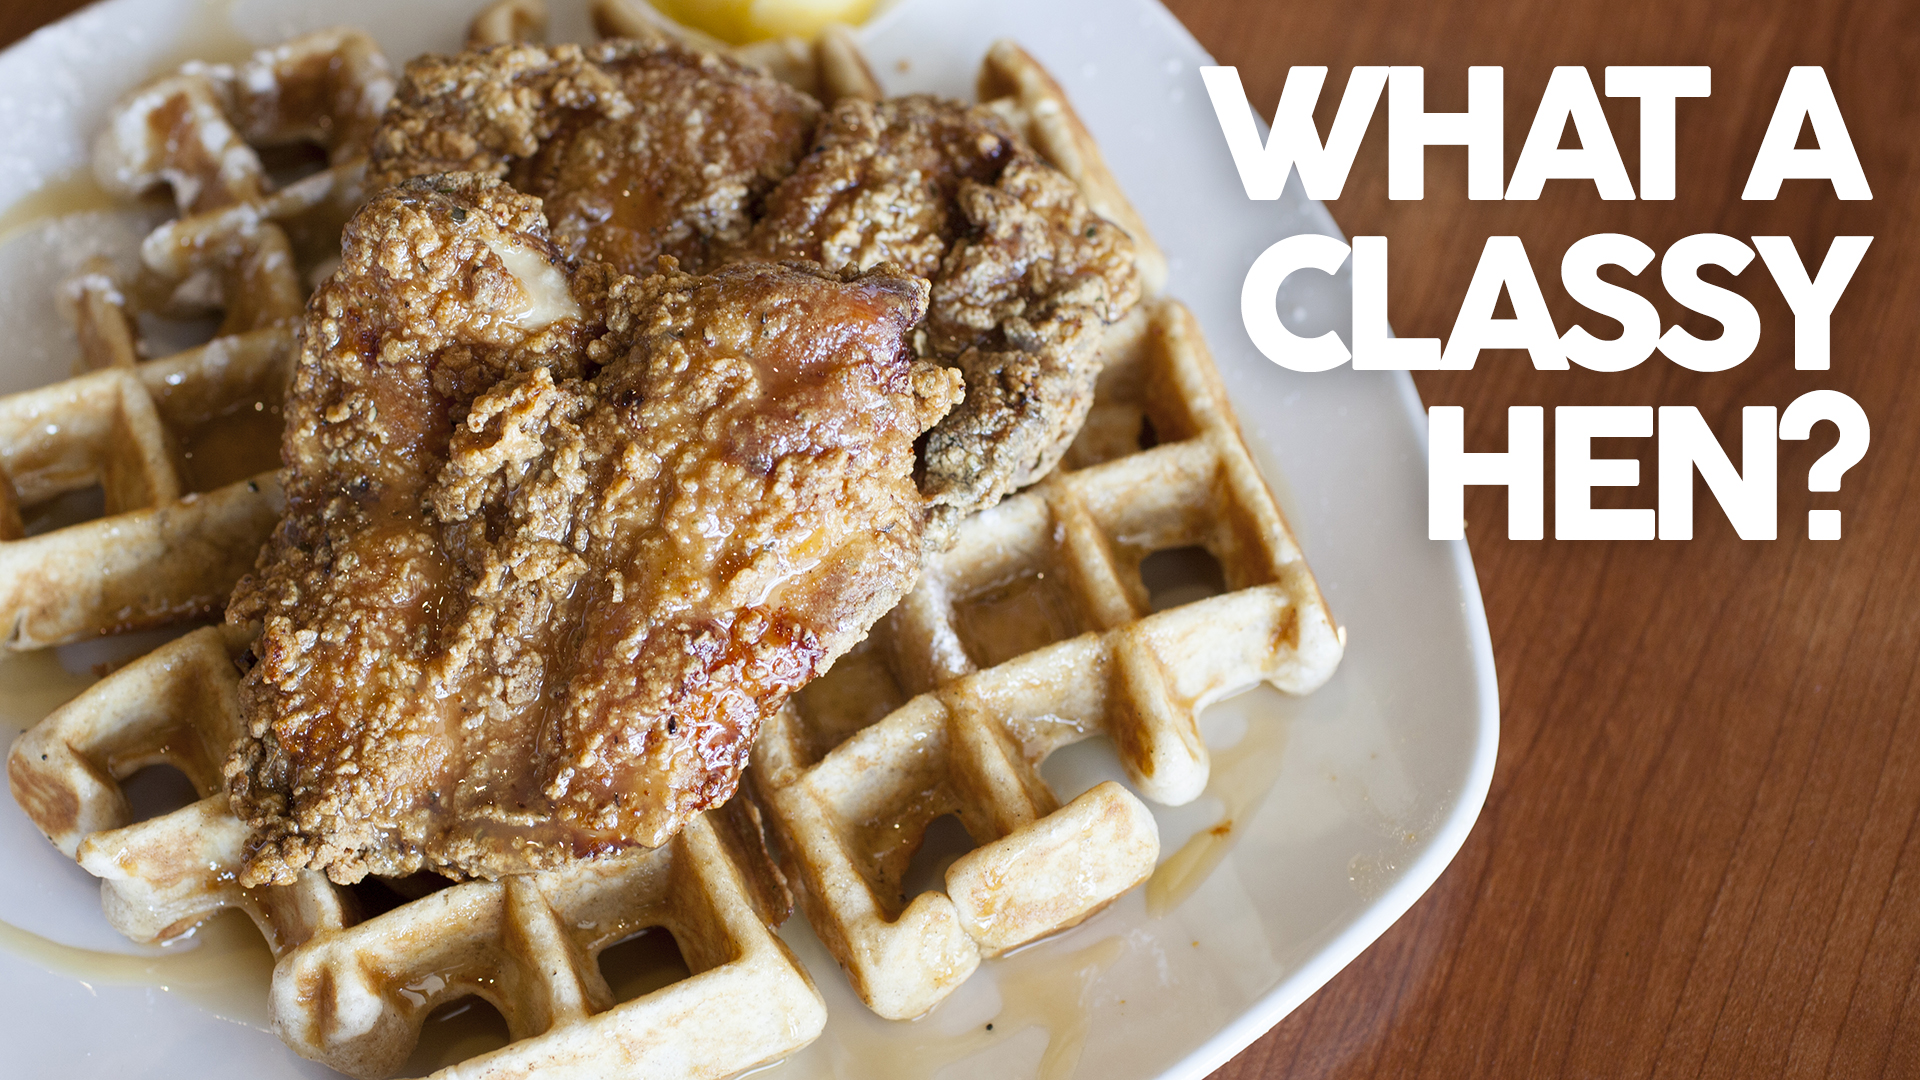 Image of Dame's Chicken and Waffles